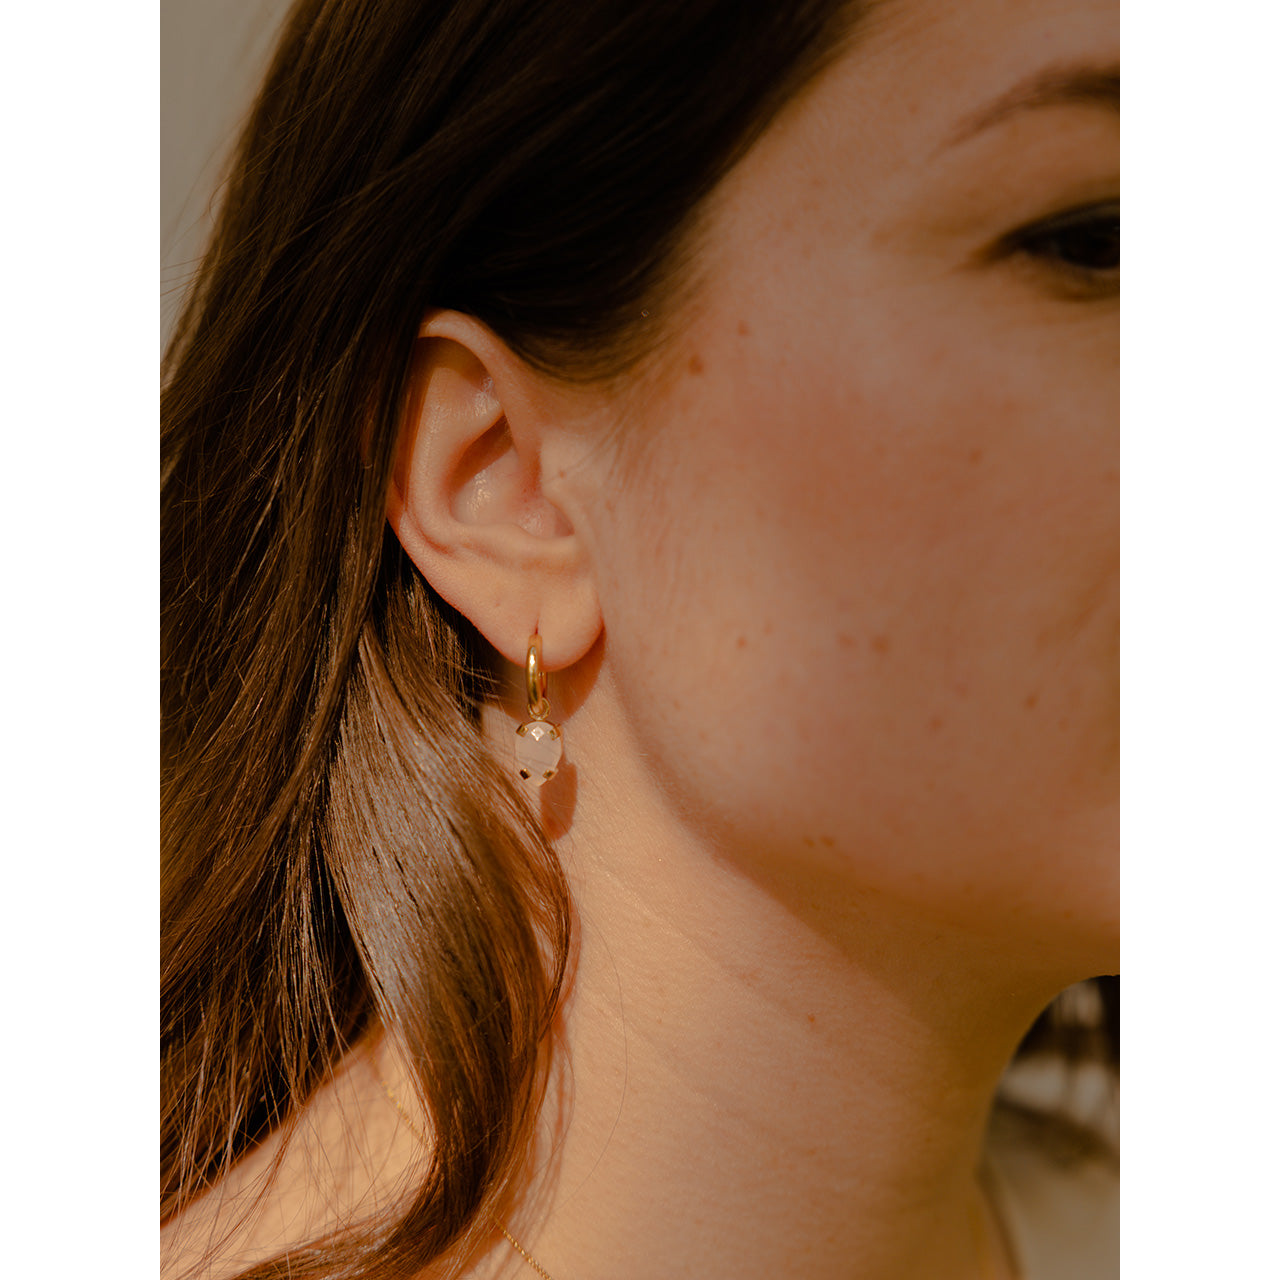 These subtle earrings are infused with elegance and a touch of playfulness. They showcase small hoops, each adorned with a distinct pendant.